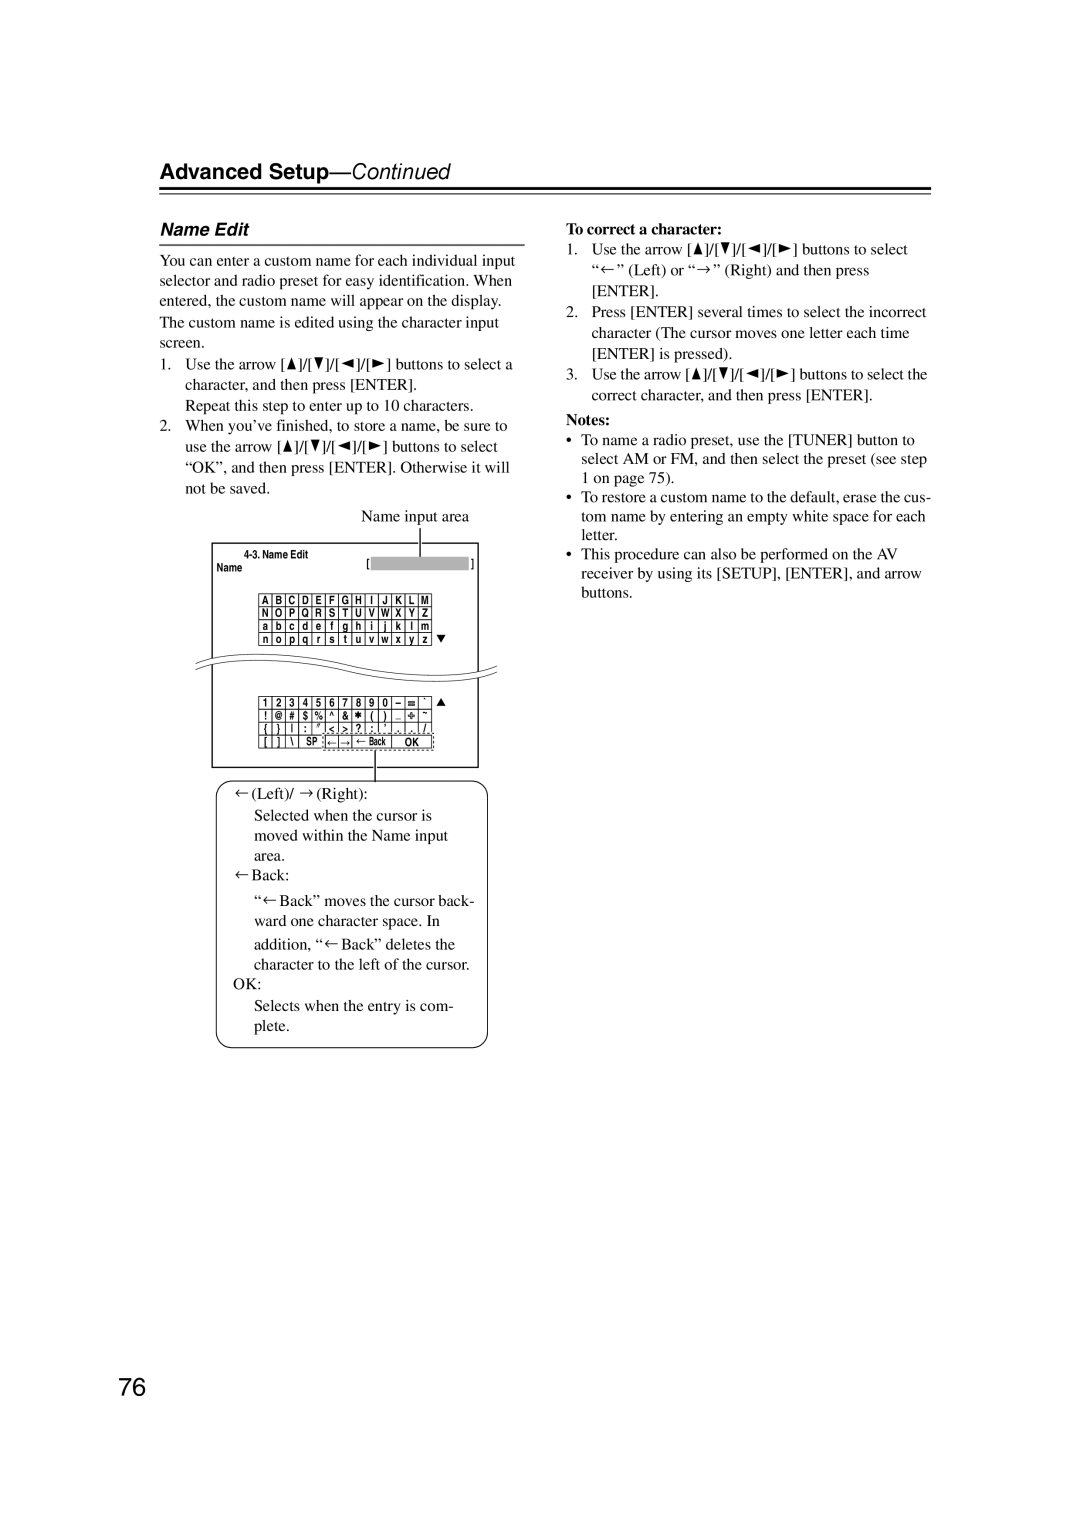 Onkyo HT-RC160 instruction manual Name Edit, To correct a character 